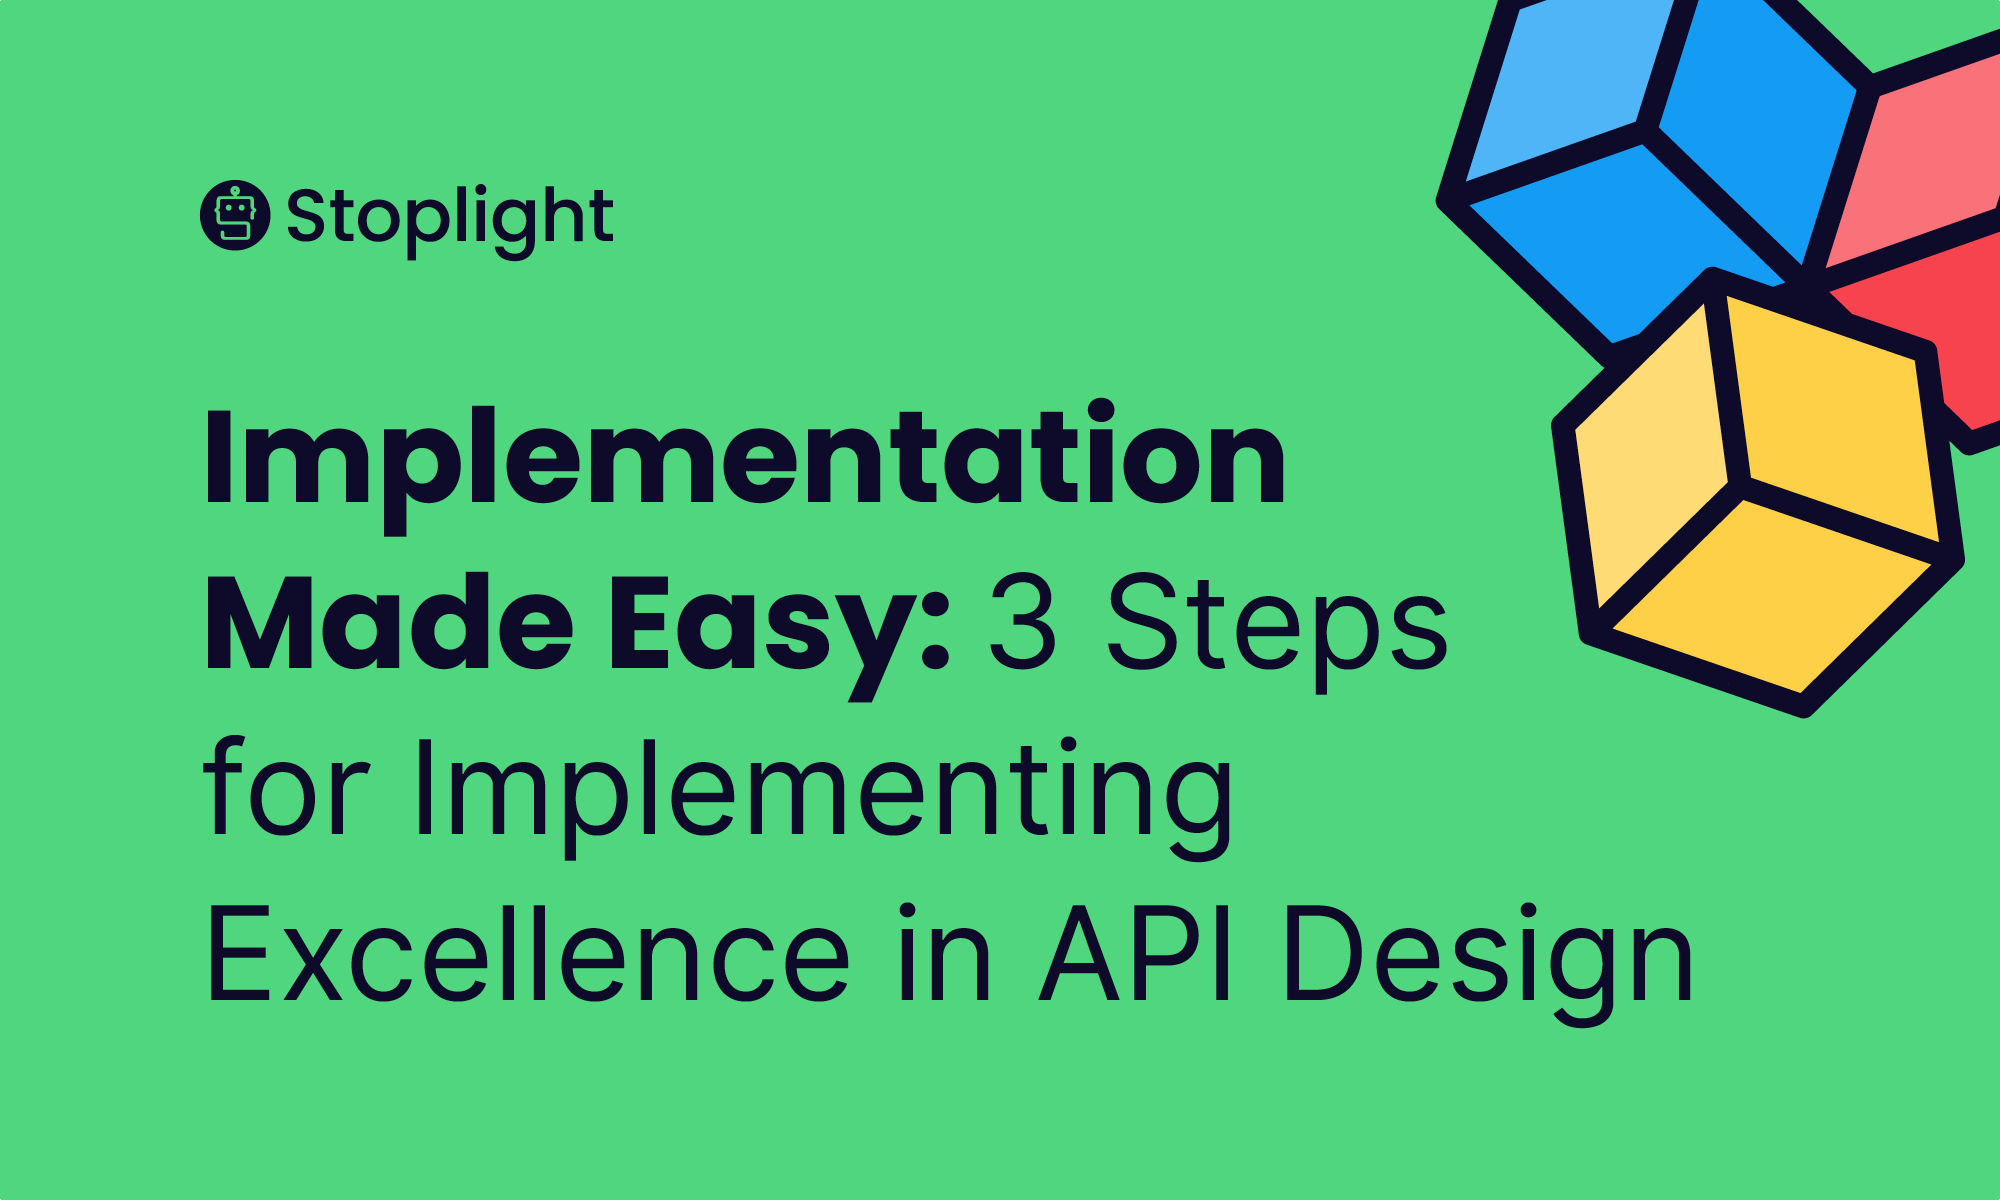 Implementation Made Easy: 3 Steps for Implementing Excellence in API Design